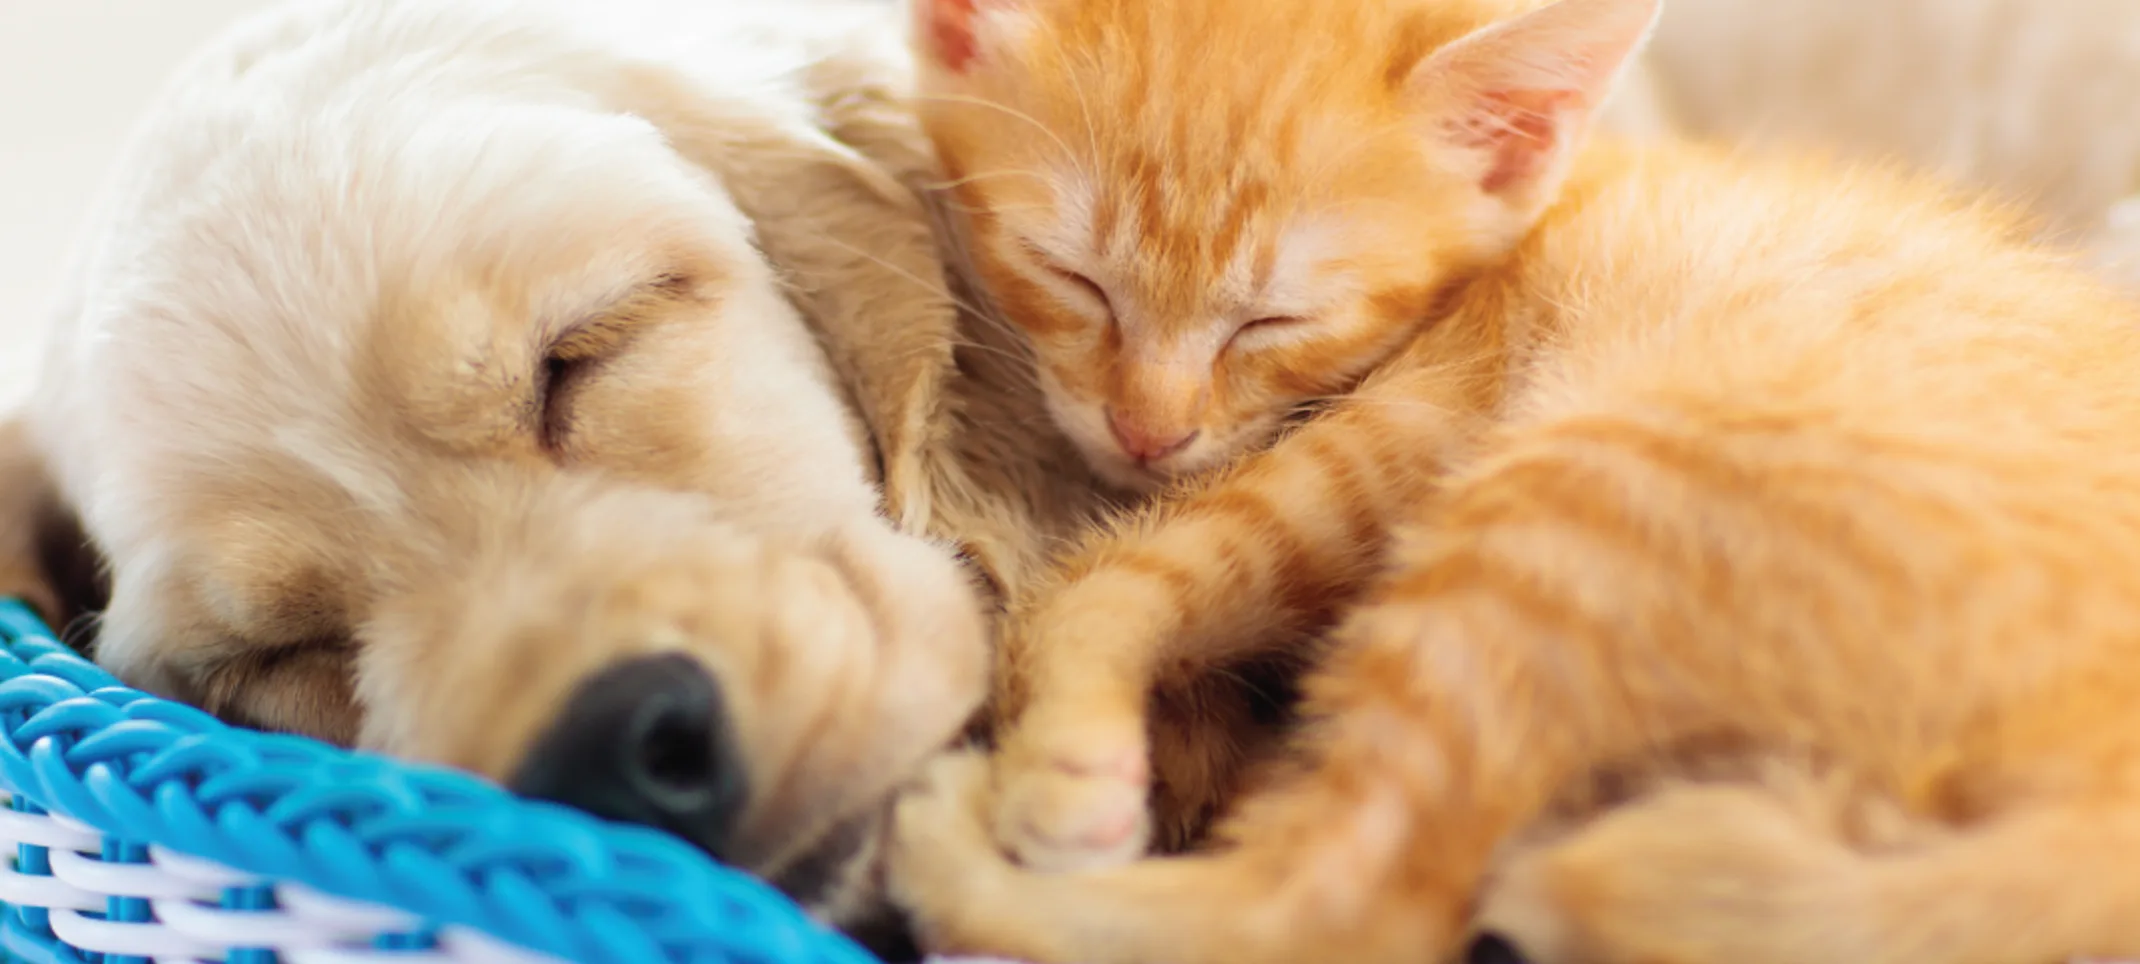 DOG AND CAT LAYING TOGETHER